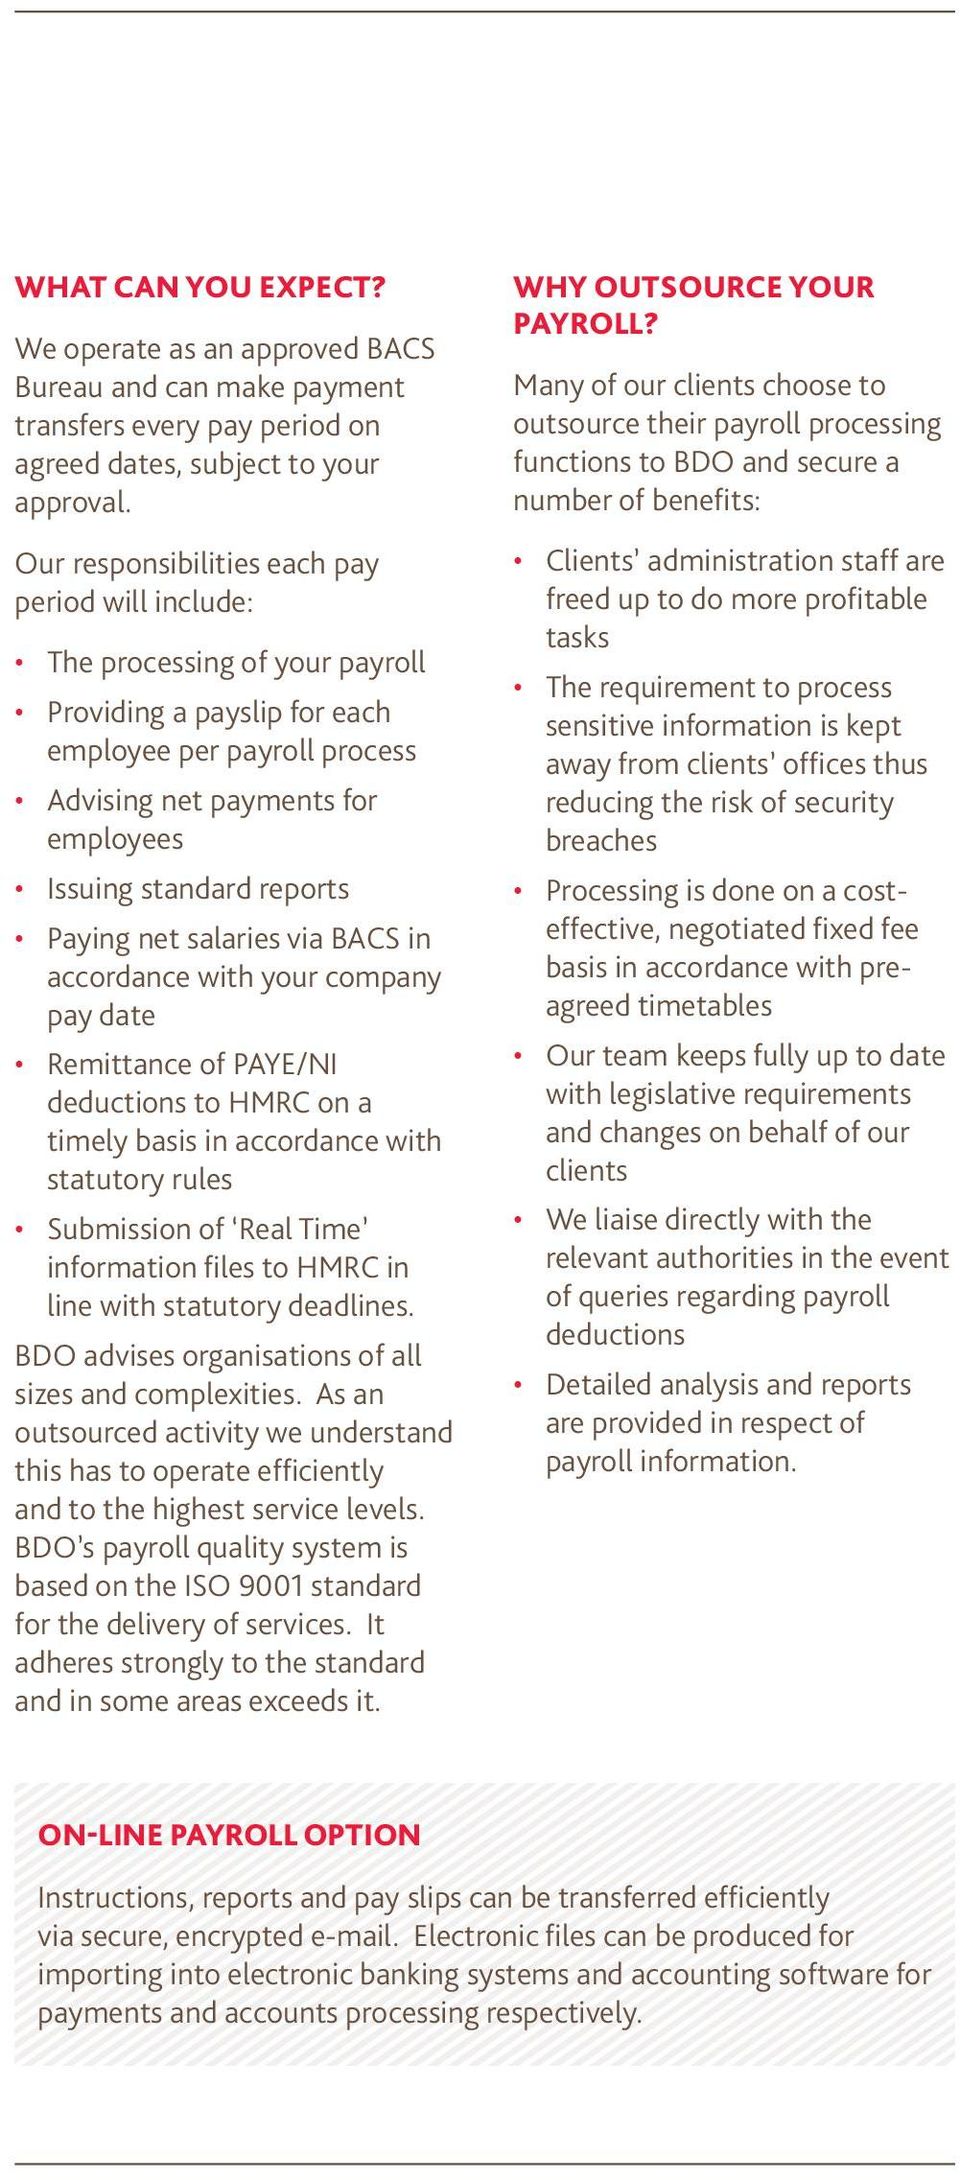 reports Paying net salaries via BACS in accordance with your company pay date Remittance of PAYE/NI deductions to HMRC on a timely basis in accordance with statutory rules Submission of Real Time